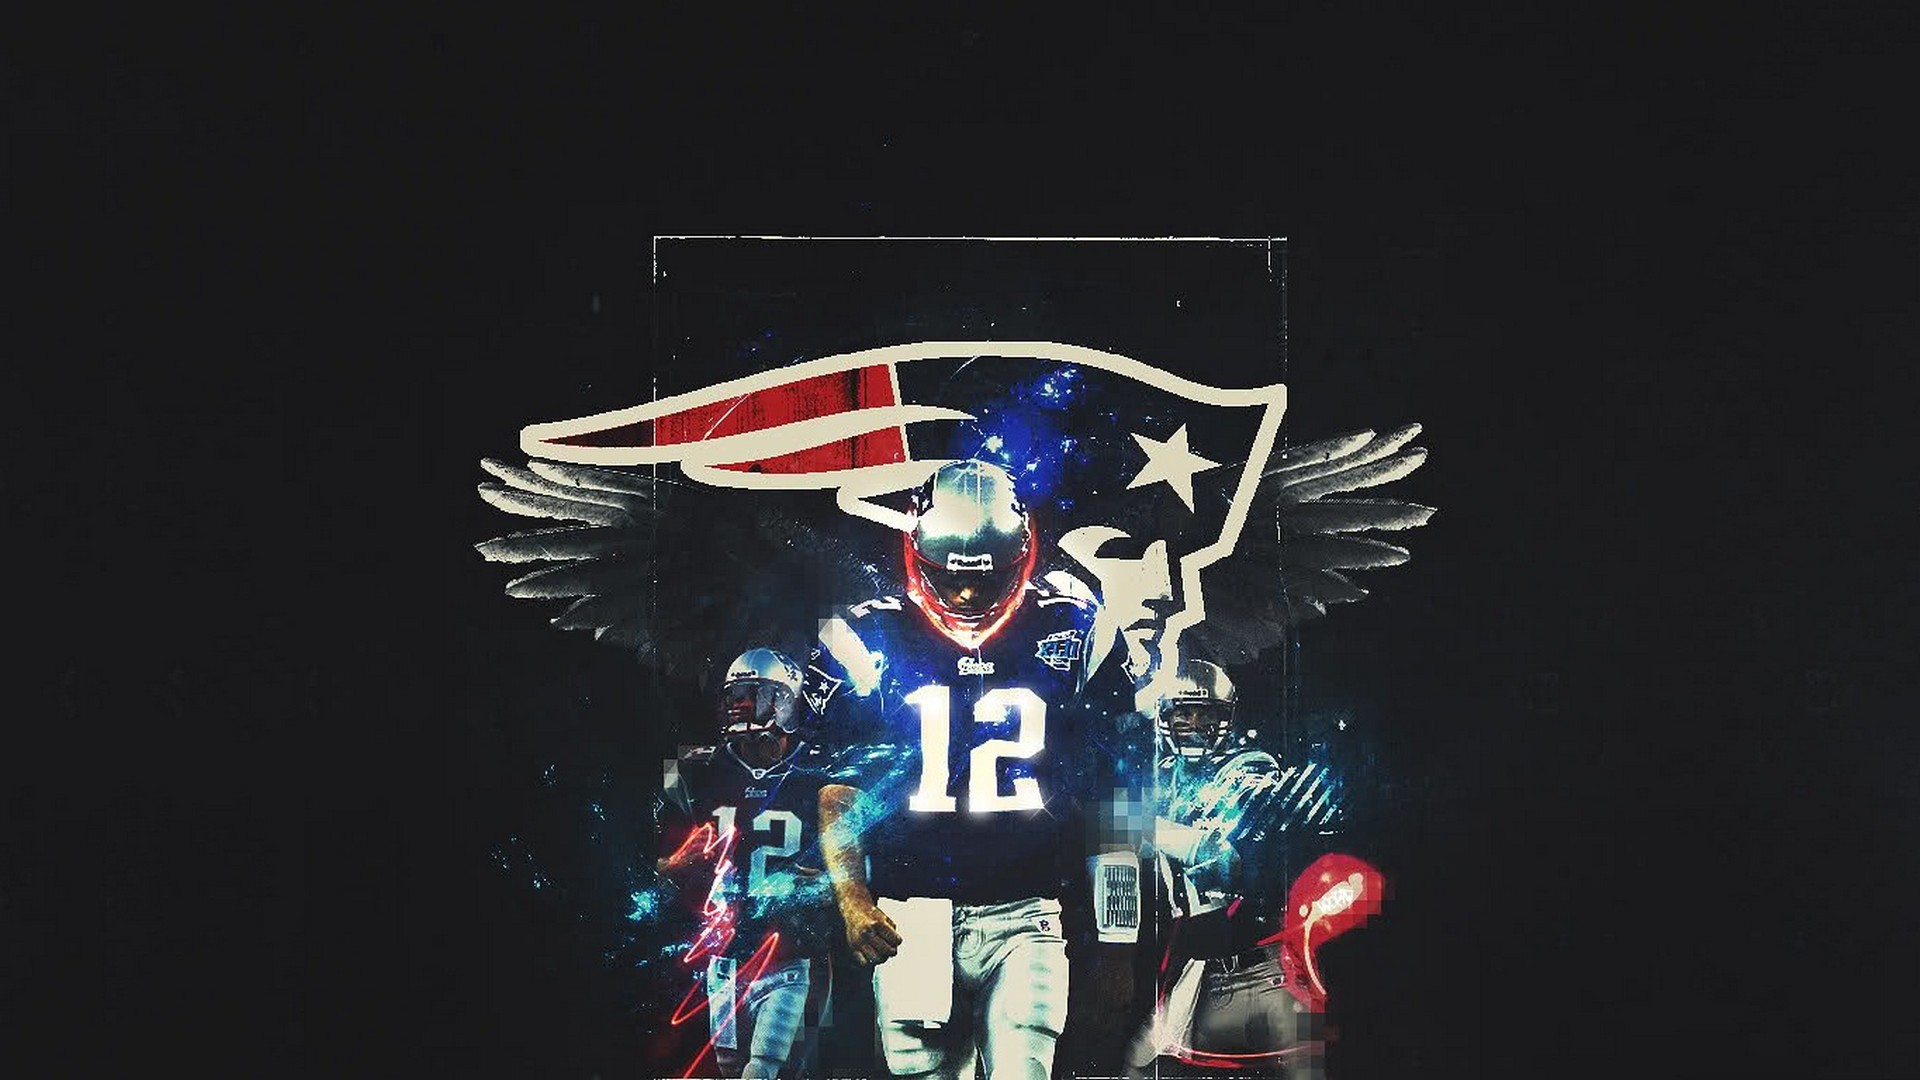 Wallpapers Computer Tom Brady Super Bowl With Resolution 1920X1080 pixel. You can make this wallpaper for your Desktop Computer Backgrounds, Mac Wallpapers, Android Lock screen or iPhone Screensavers